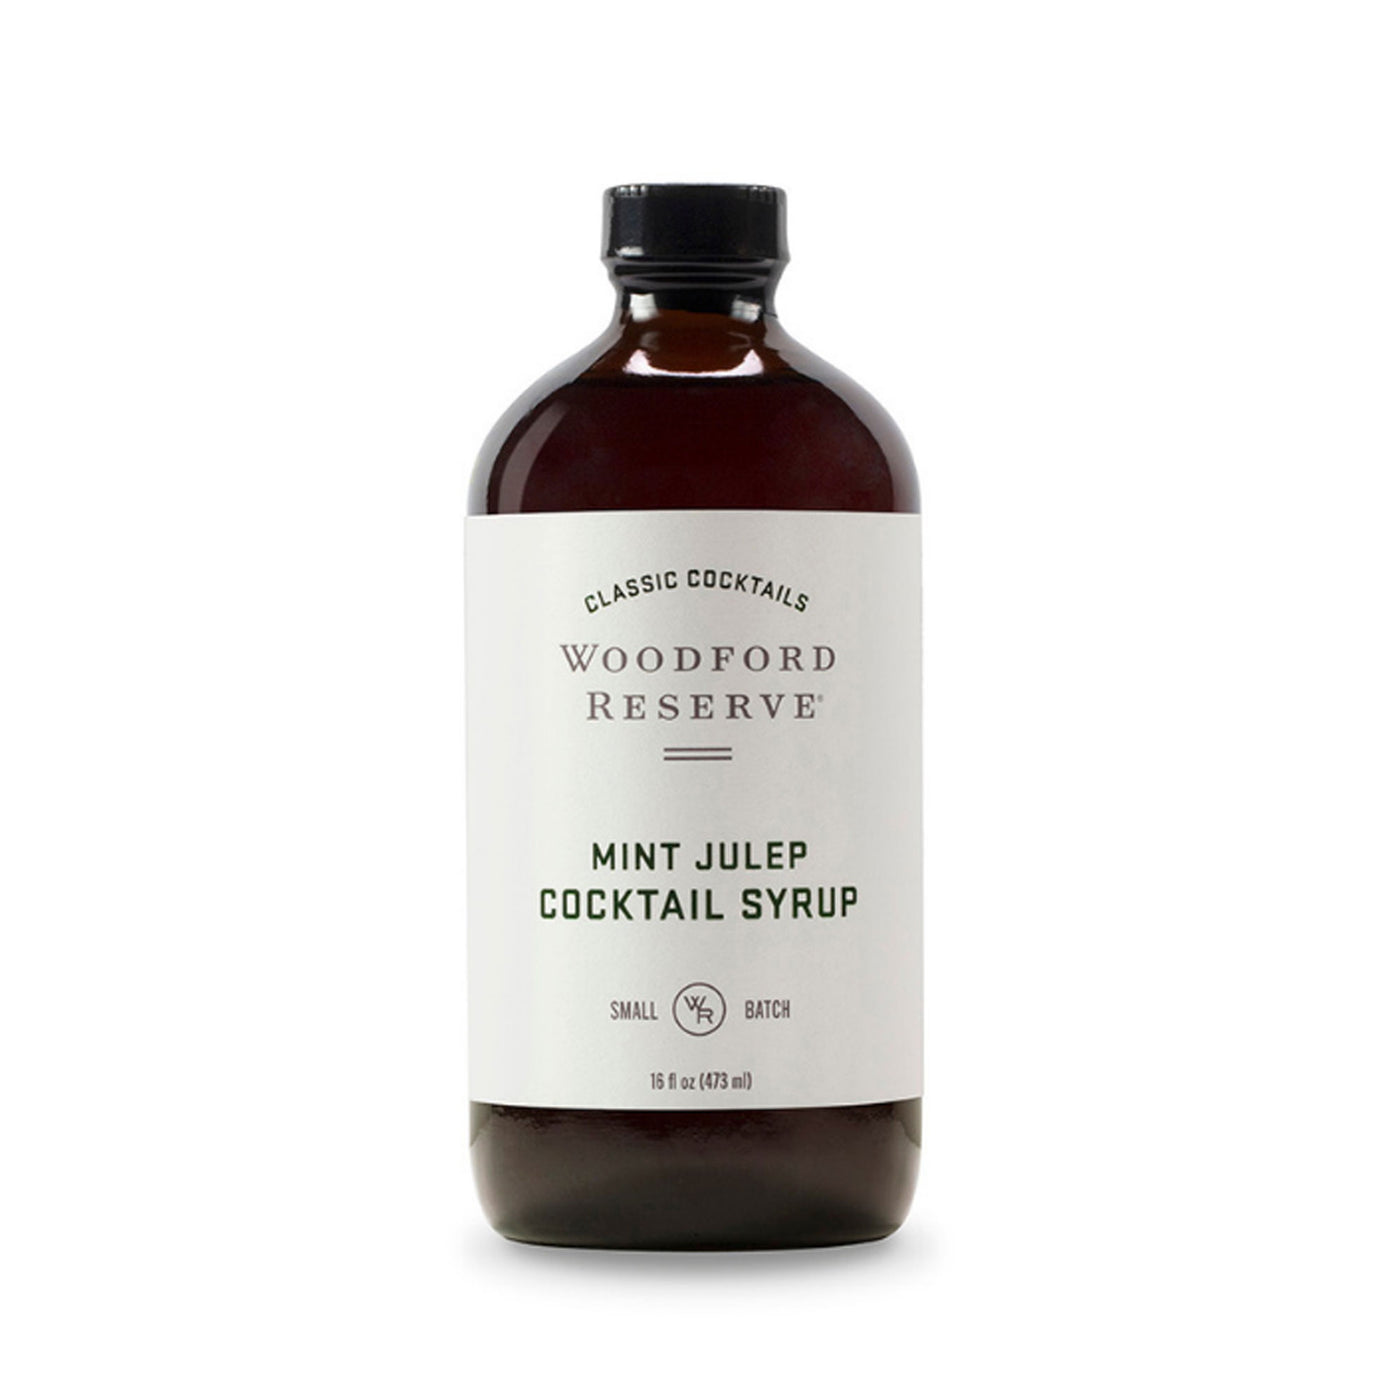 Woodford Reserve Mint Julep Cocktail Syrup